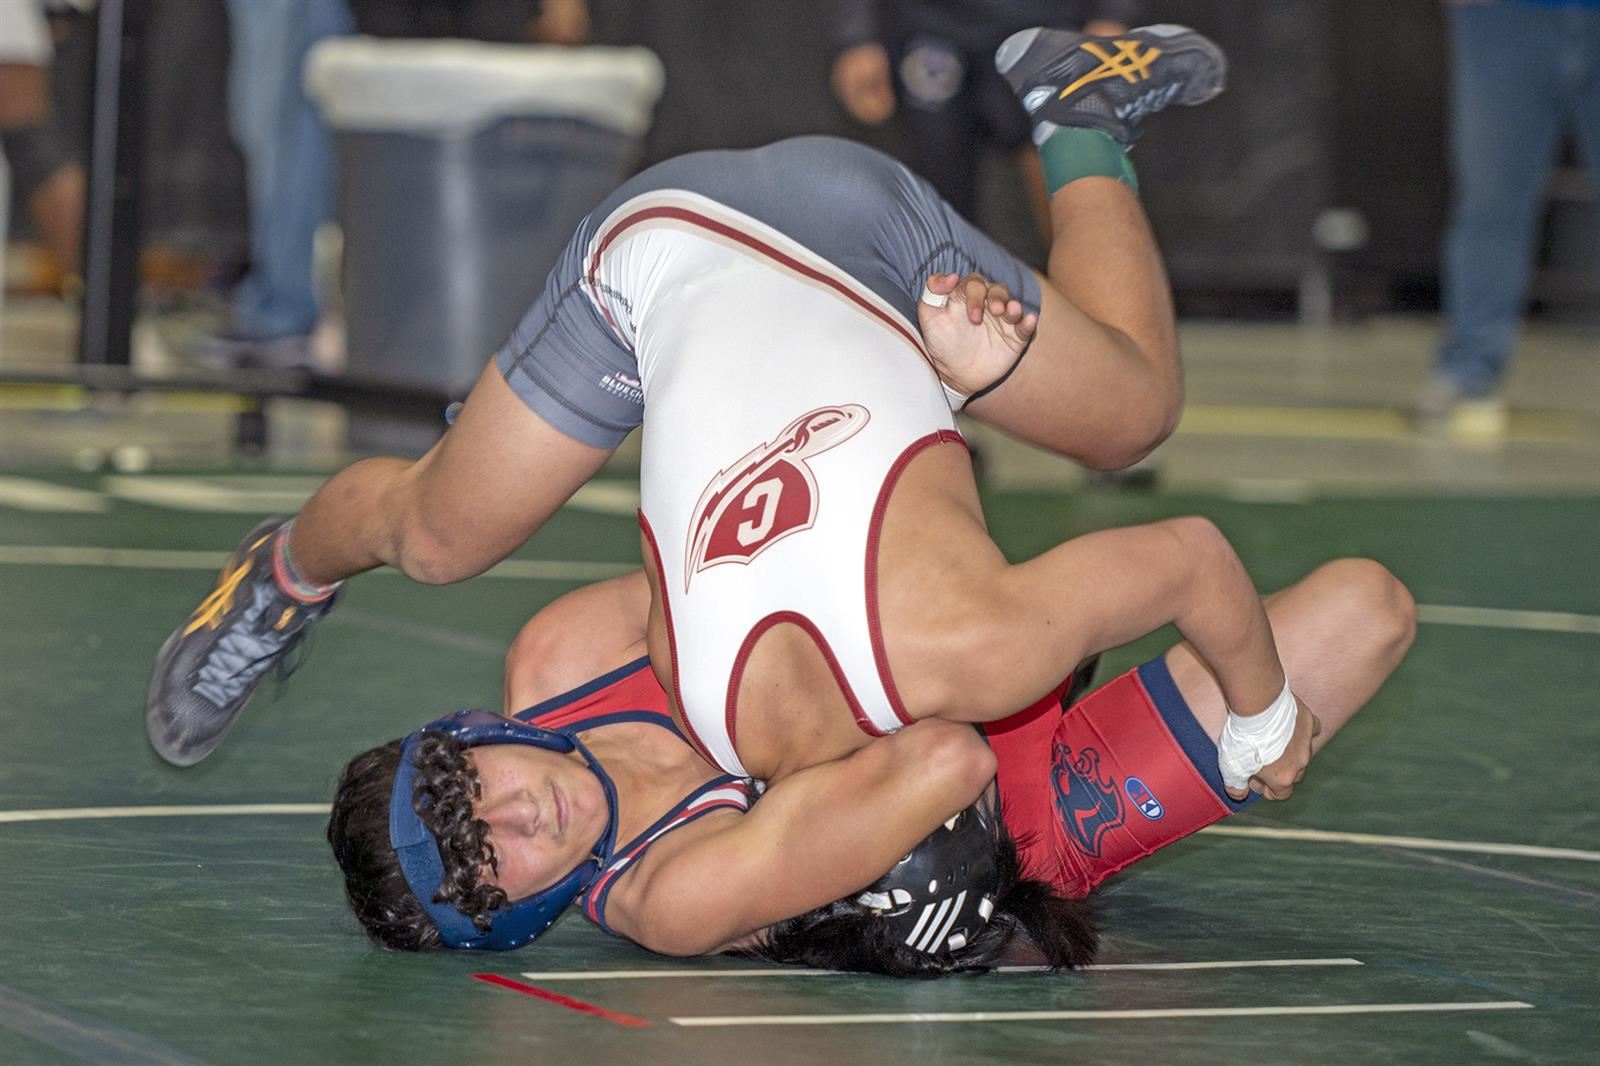 Cy Springs High School’s Christian Magana, in red, faces Keller Central High School’s Kody Tanimoto in a 113-pound match.